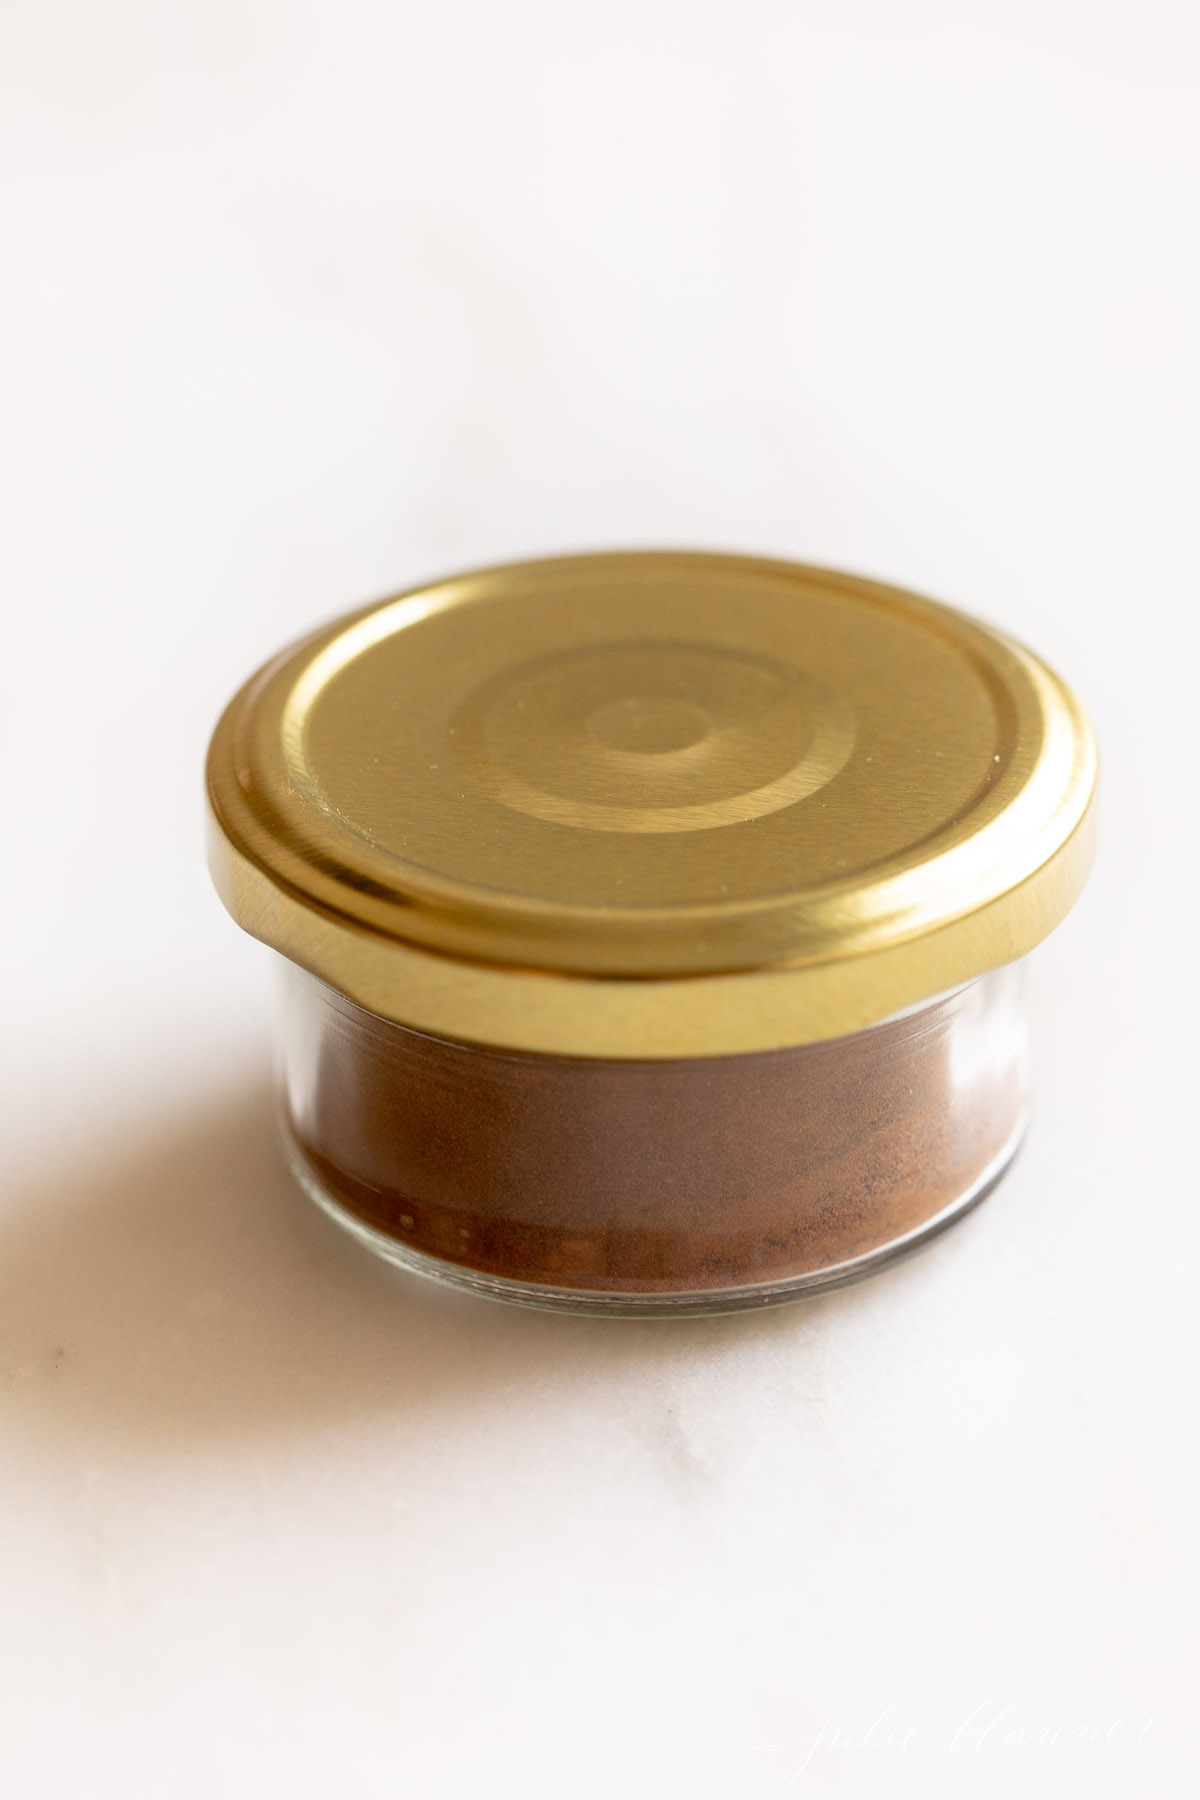 Homemade allspice blend in a small glass jar with a gold lid on a white countertop.